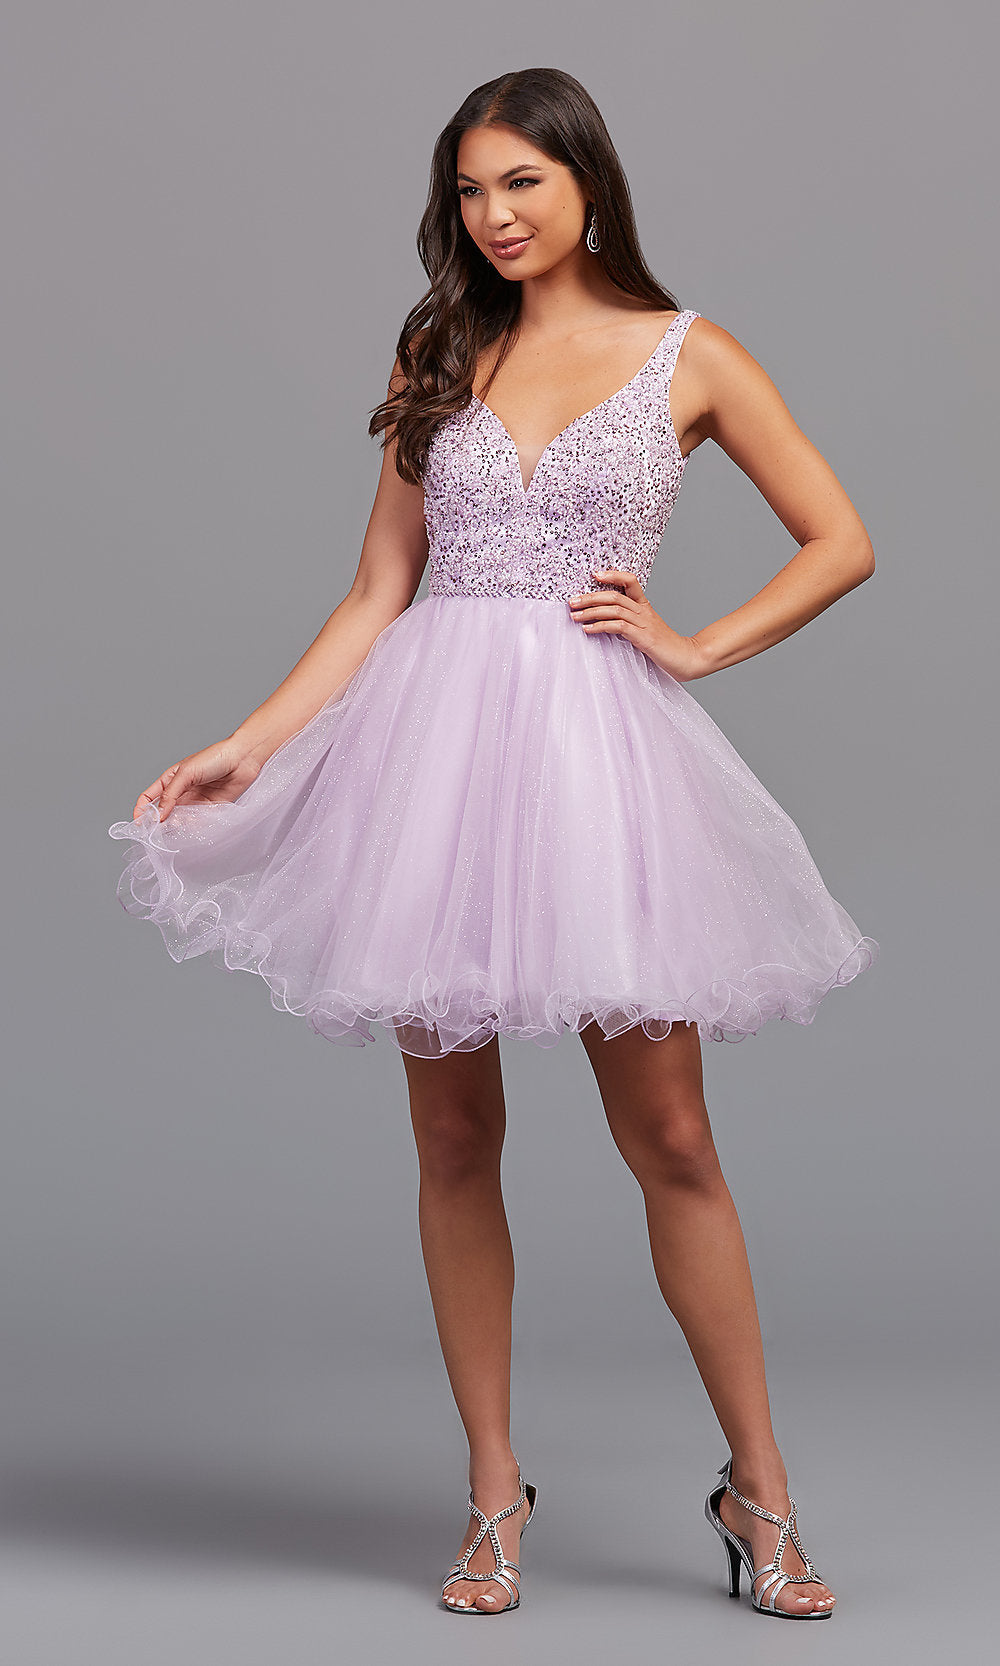  Beaded Fit-and-Flare Short Formal Homecoming Dress